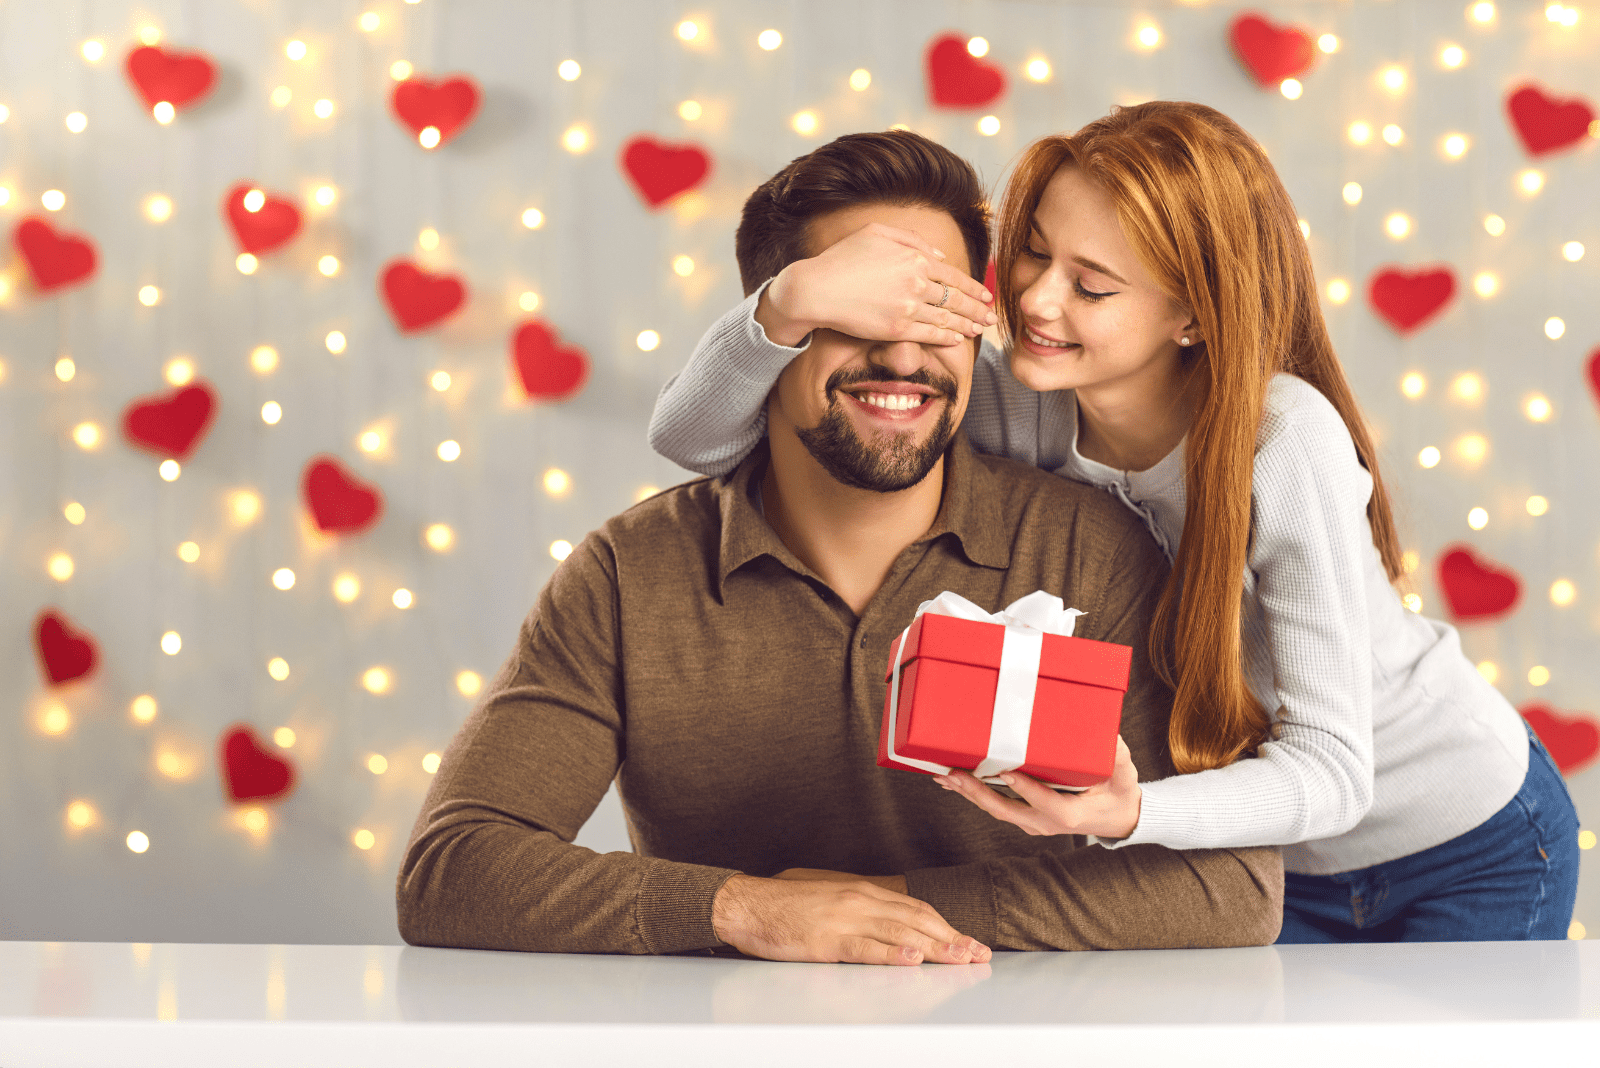 120 Valentines Quotes For Husband To Make Him Feel Loved